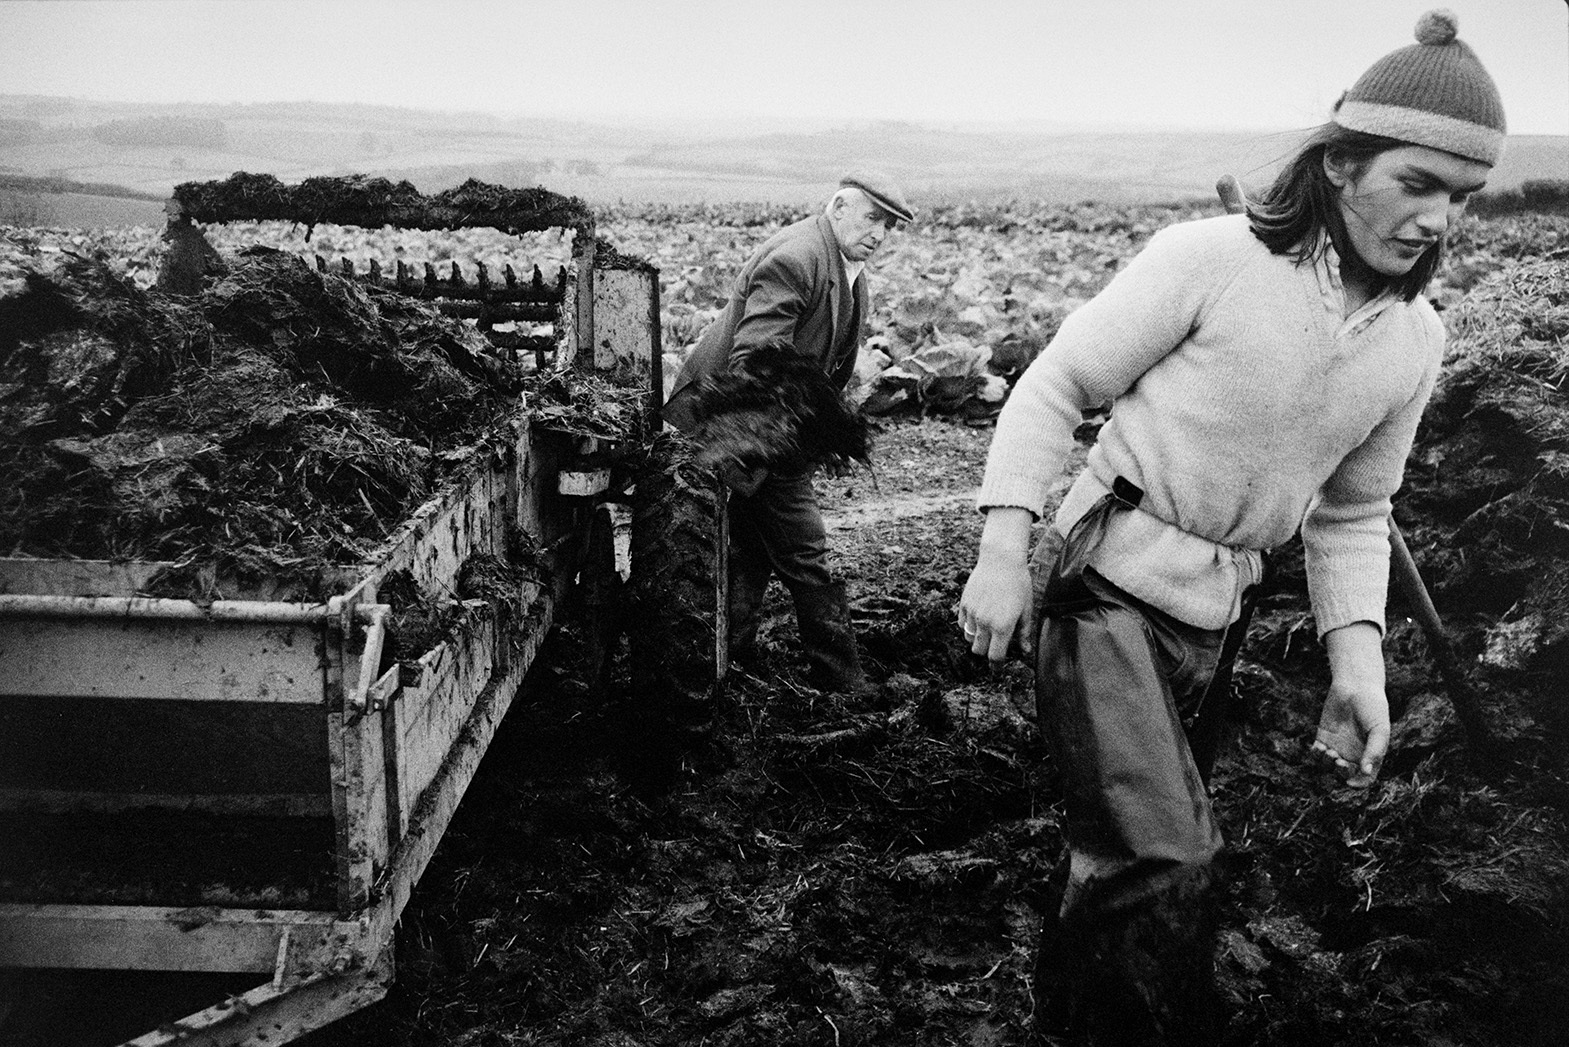 Derek Bright, in the foreground, helping Tom Hooper load a muck spreader with manure from a muck heap or dung heap, in a field at Mill Road Farm, Beaford. The farm was also known as Jeffrys.